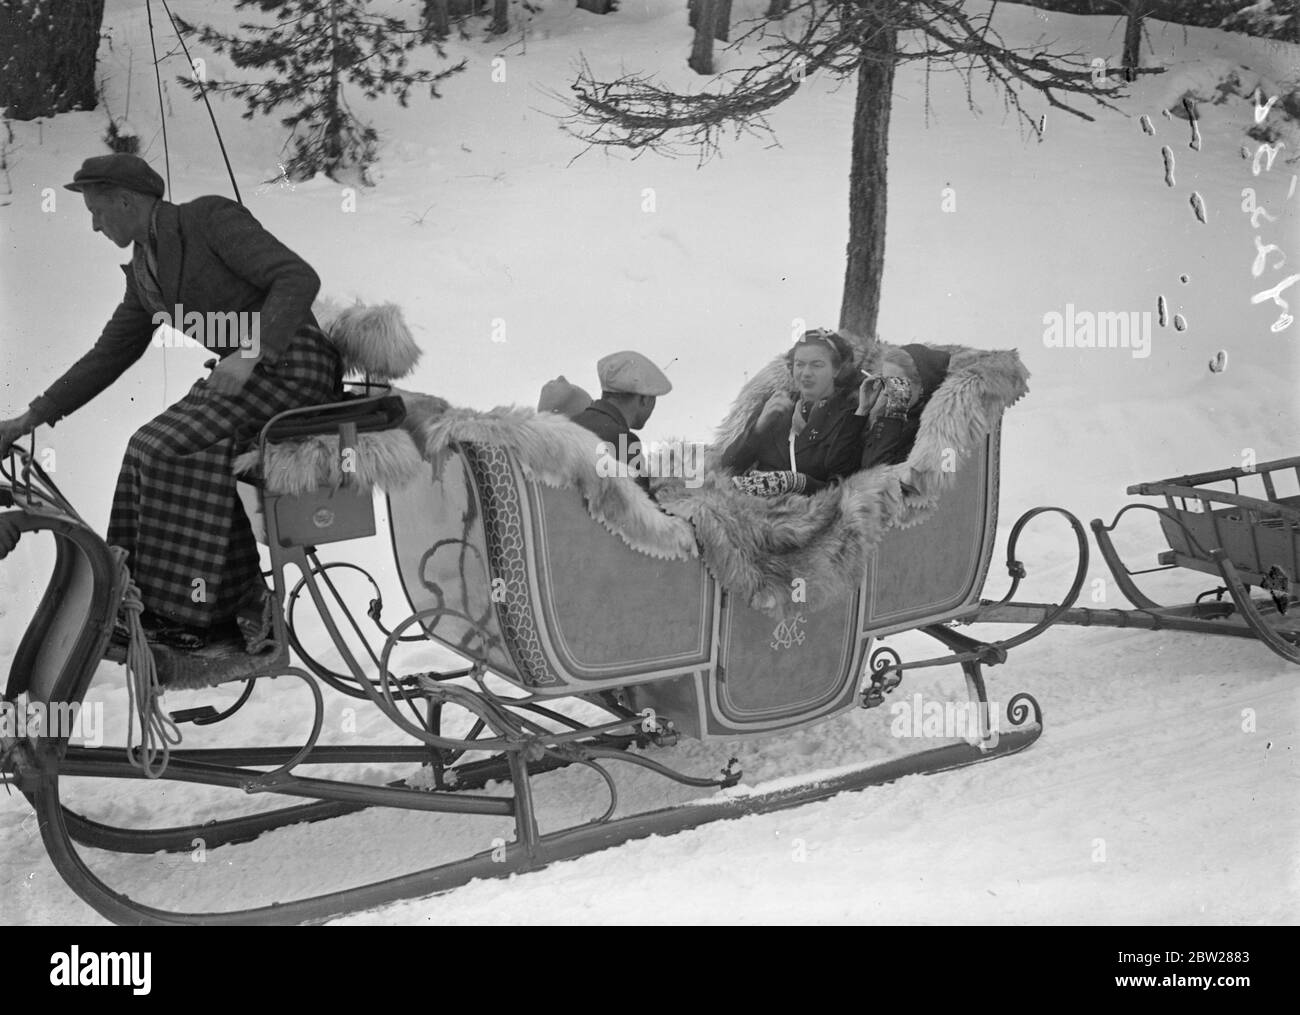 Countess Haugwitz Reventlow goes by sleigh. Countess Barbara Haugwitz Reventlow adjusting her sunglasses as she rode in a sleigh through the snow at St Moritz, Switzerland, where she is holidaying with her husband and baby son. With her in the sleigh is the Hon Mrs Drogo Montagu, daughter of Lord Beaverbrook, the newspaper proprietor. Countess Haugwitz Revetlow, the former Barbara Hutton, Woolworth heiress, recently announced her American nationality. 1 January 1938 Stock Photo